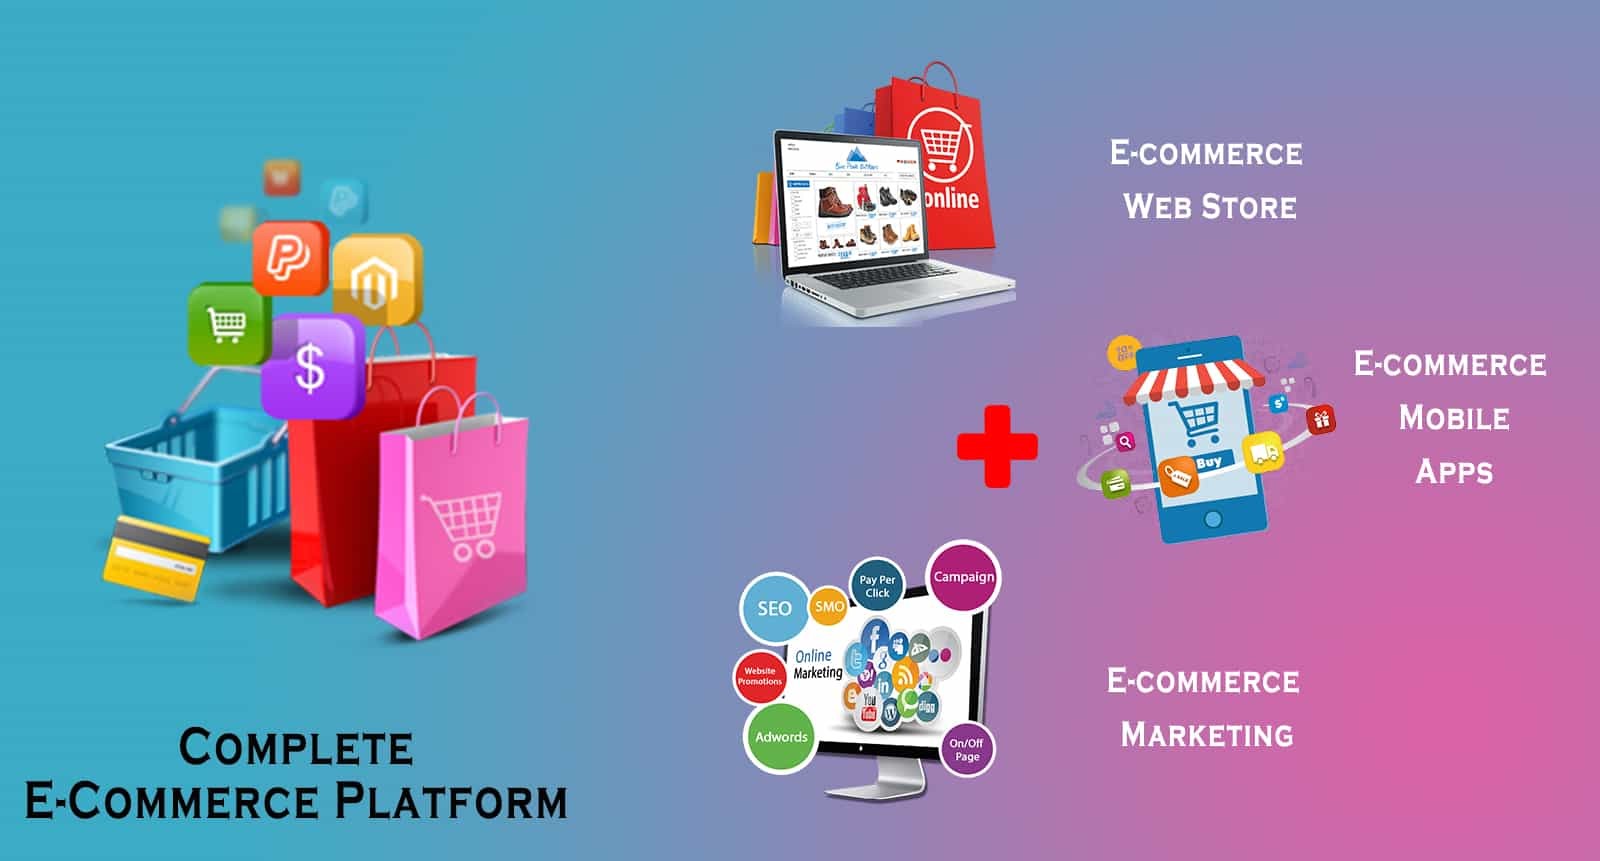 Complete ecommerce platform where you can sell your product and services, connect automatically to search engines